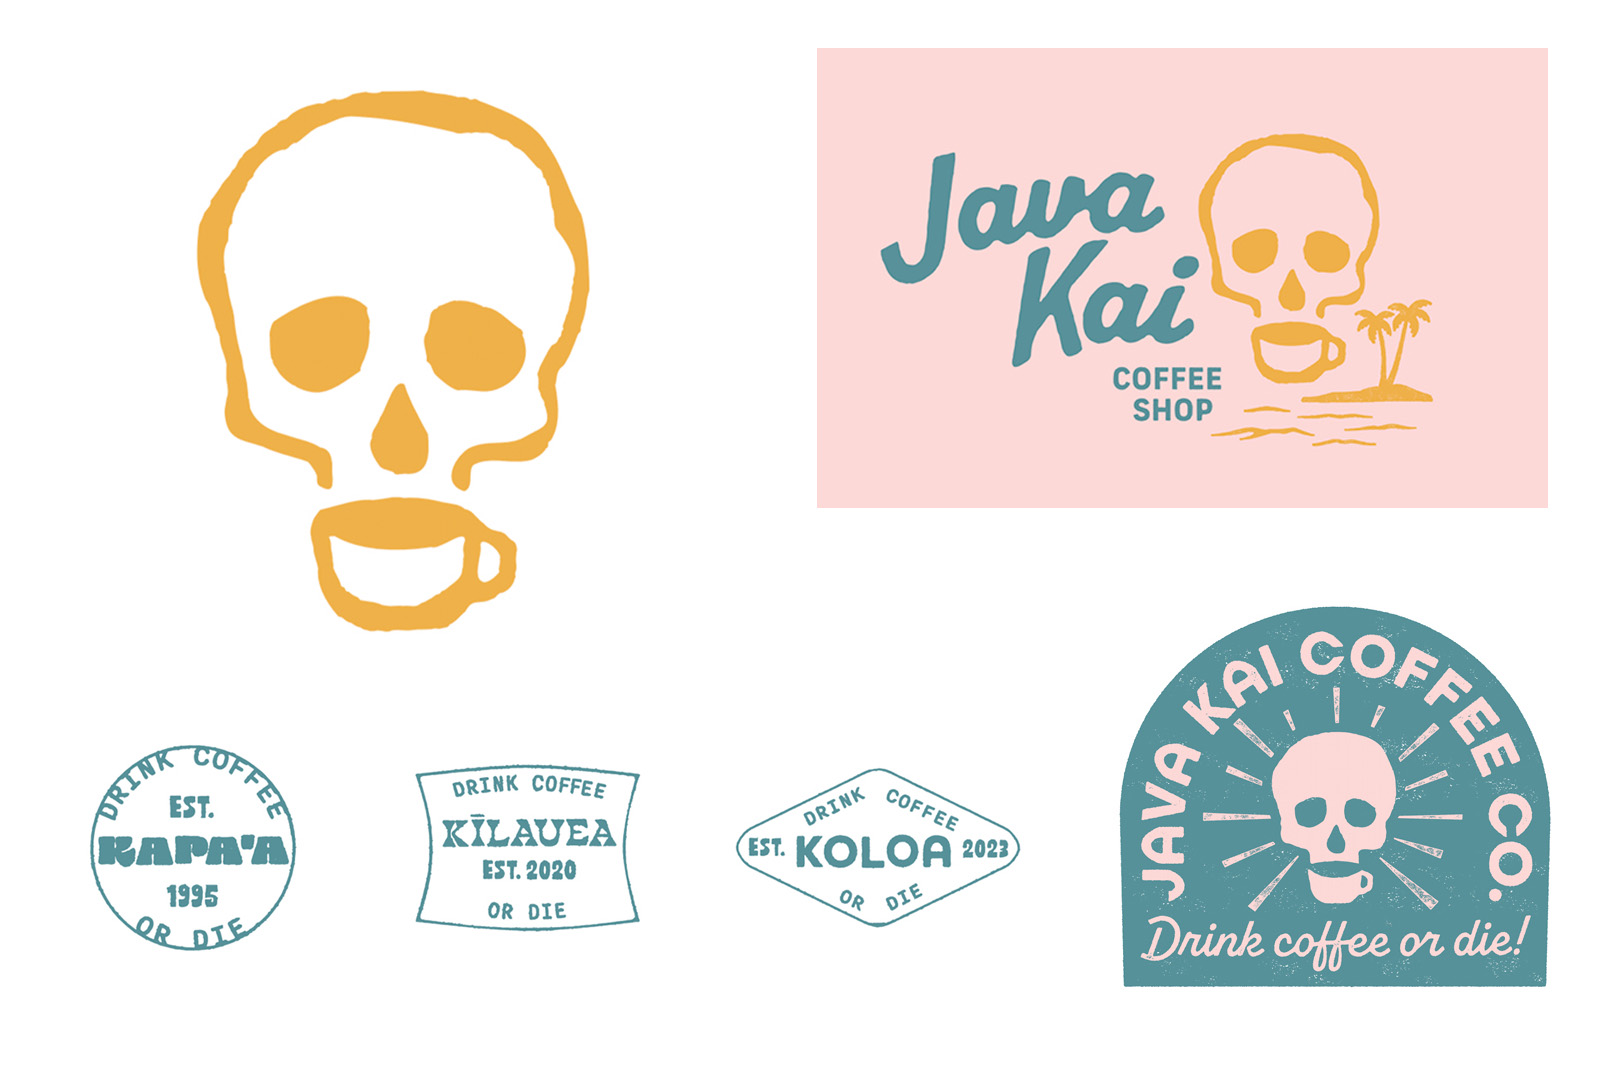 Logo and visual identity design for Java Kai, a gold ADDY winner.